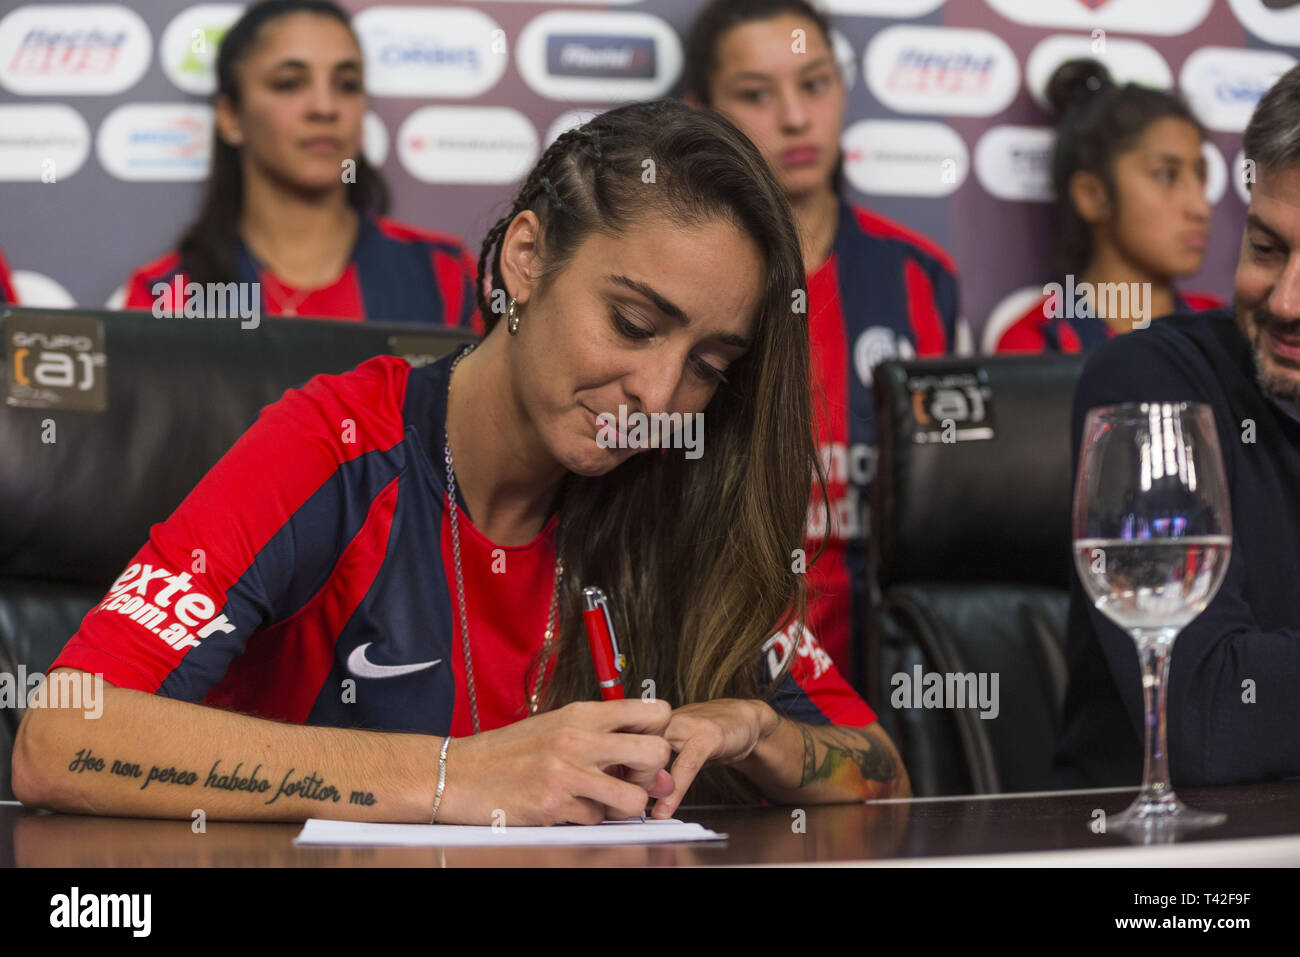 April 12, 2019 - City Of Buenos Aires, City of Buenos Aires, Argentina - SPORTS WorldNews. 2019 April 12, City of Buenos Aires, Argentina. Athletic Club San Lorenzo de Almagro Female football team sign on 2019 April 12th the first professional female football contract in Argentina on first category, after the Argentinian Football Association (AFA in Spanish) agreed on 2019 March 18 to professionalized female football.MACARENA SANCHEZ, one of the football players who fight the lasts months for Professional Female Football, sign on 2019 April 12th the first professional female football contract Stock Photo